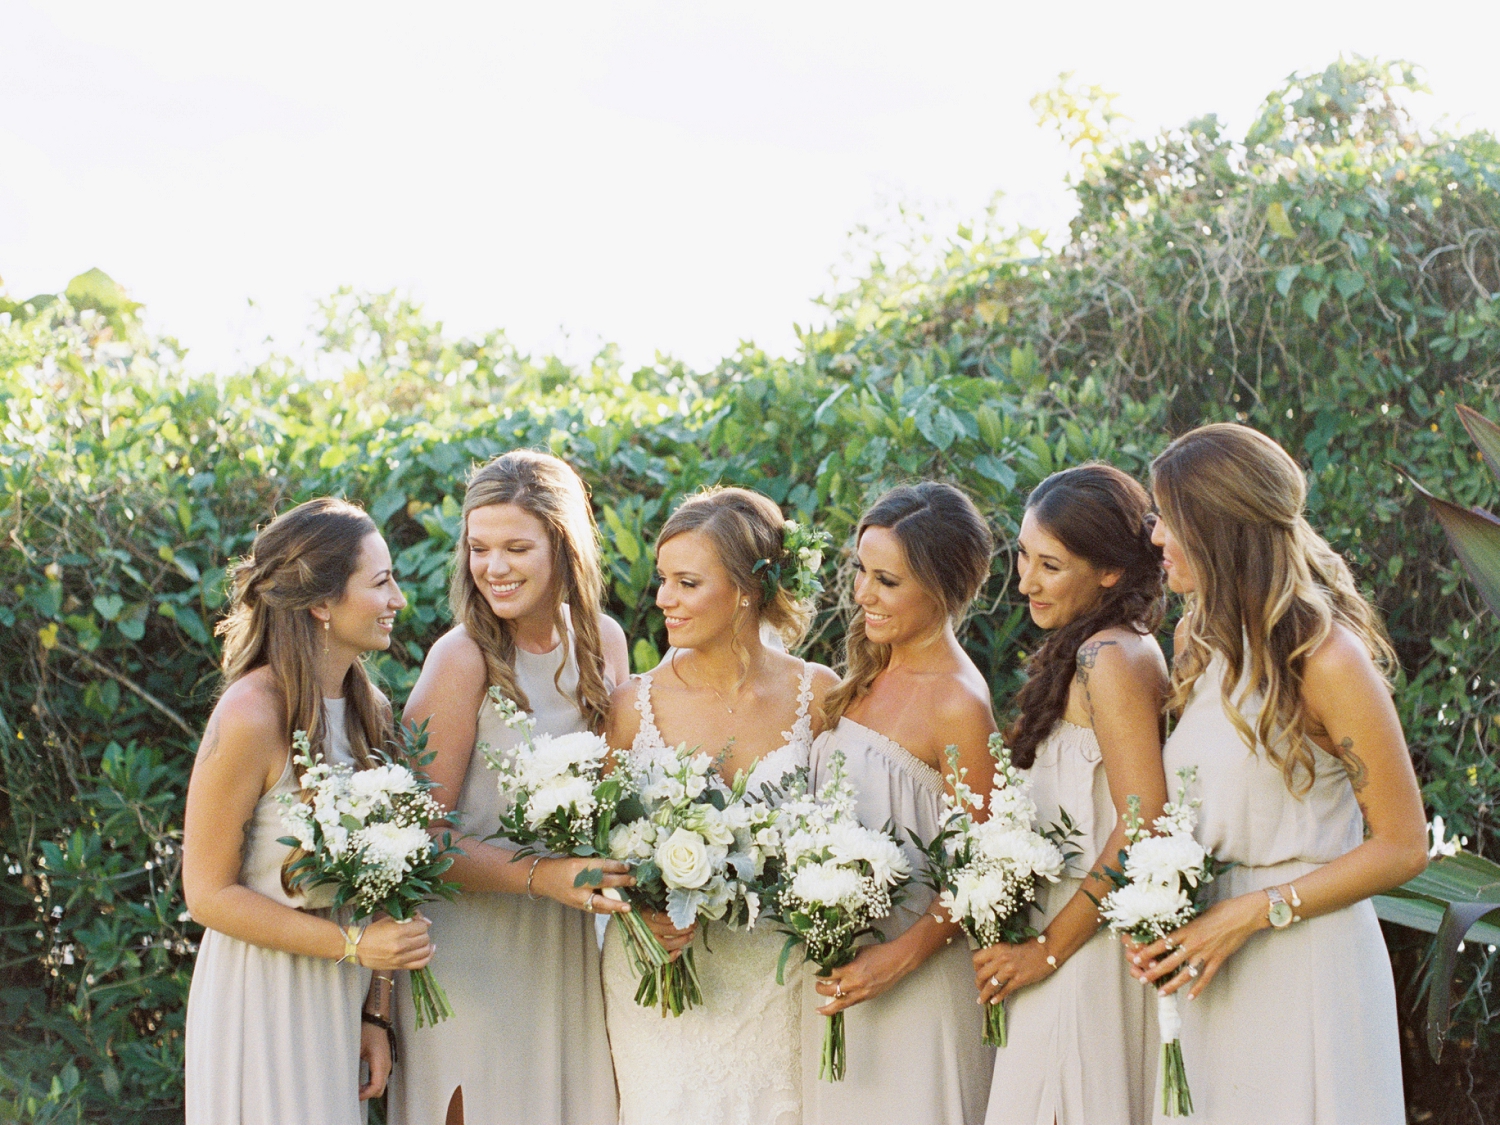 stella york wedding gown, nude bridesmaids dress, wedding party, white and greenery bouquet